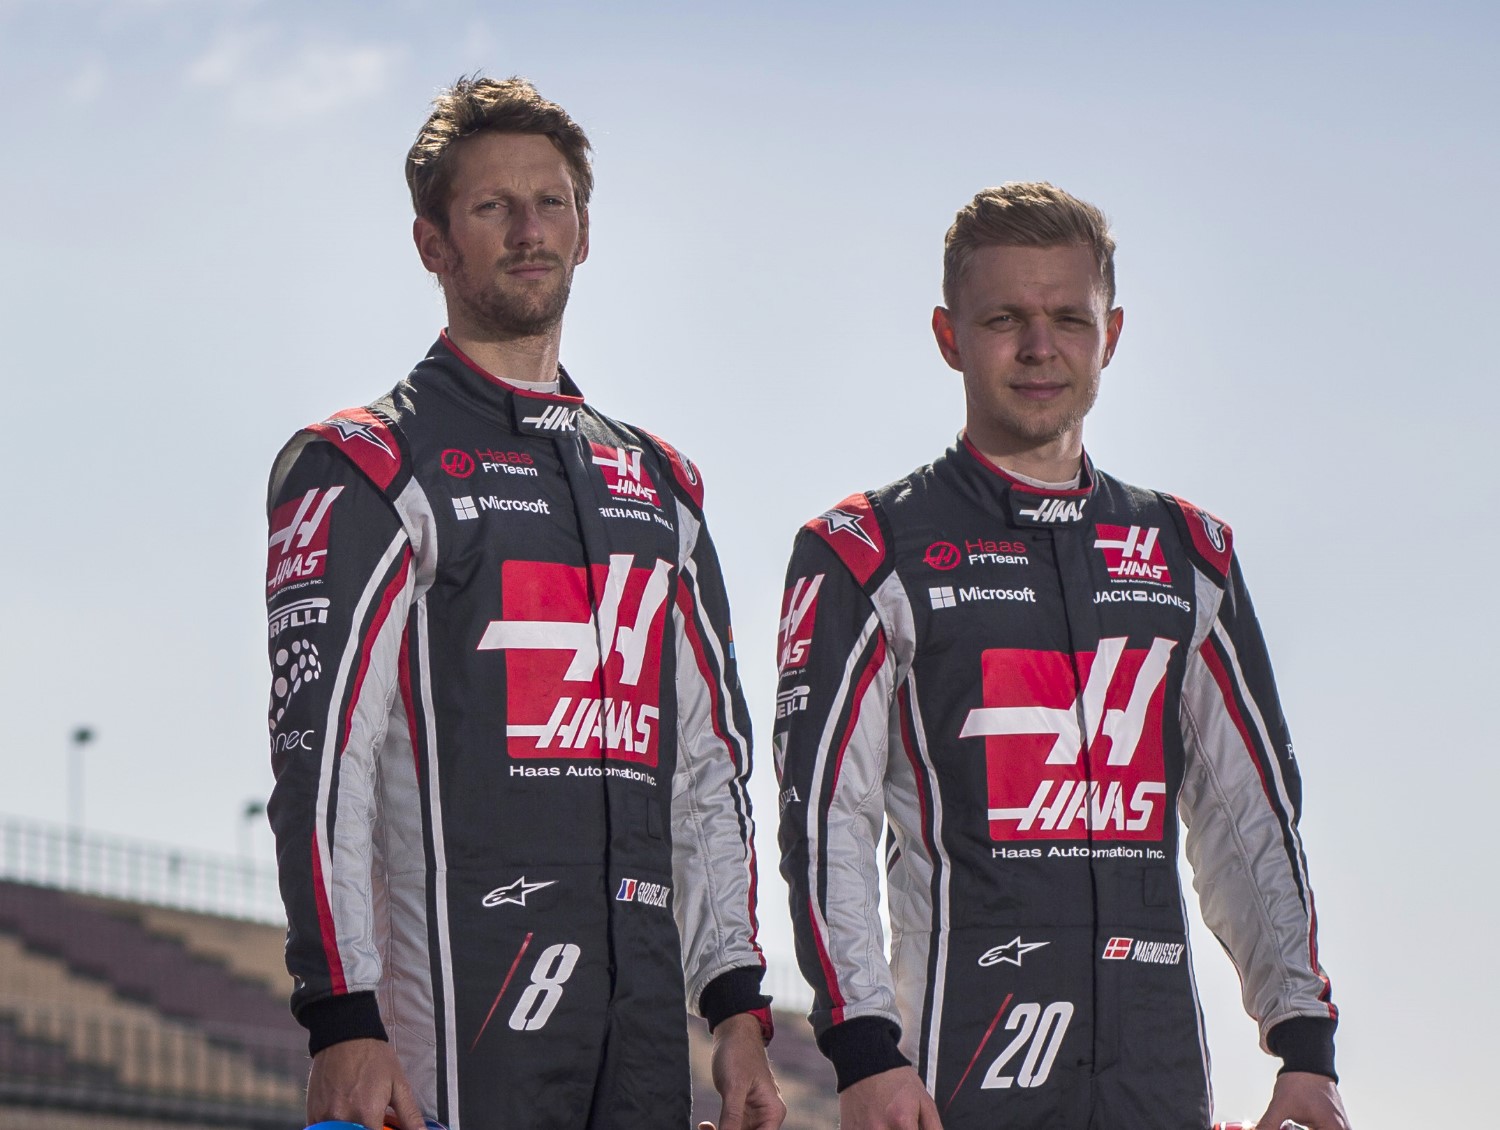 Grosjean (L) is always complaining about the Haas brakes. Meanwhile his younger teammate, Magnussen (R) keeps beating him